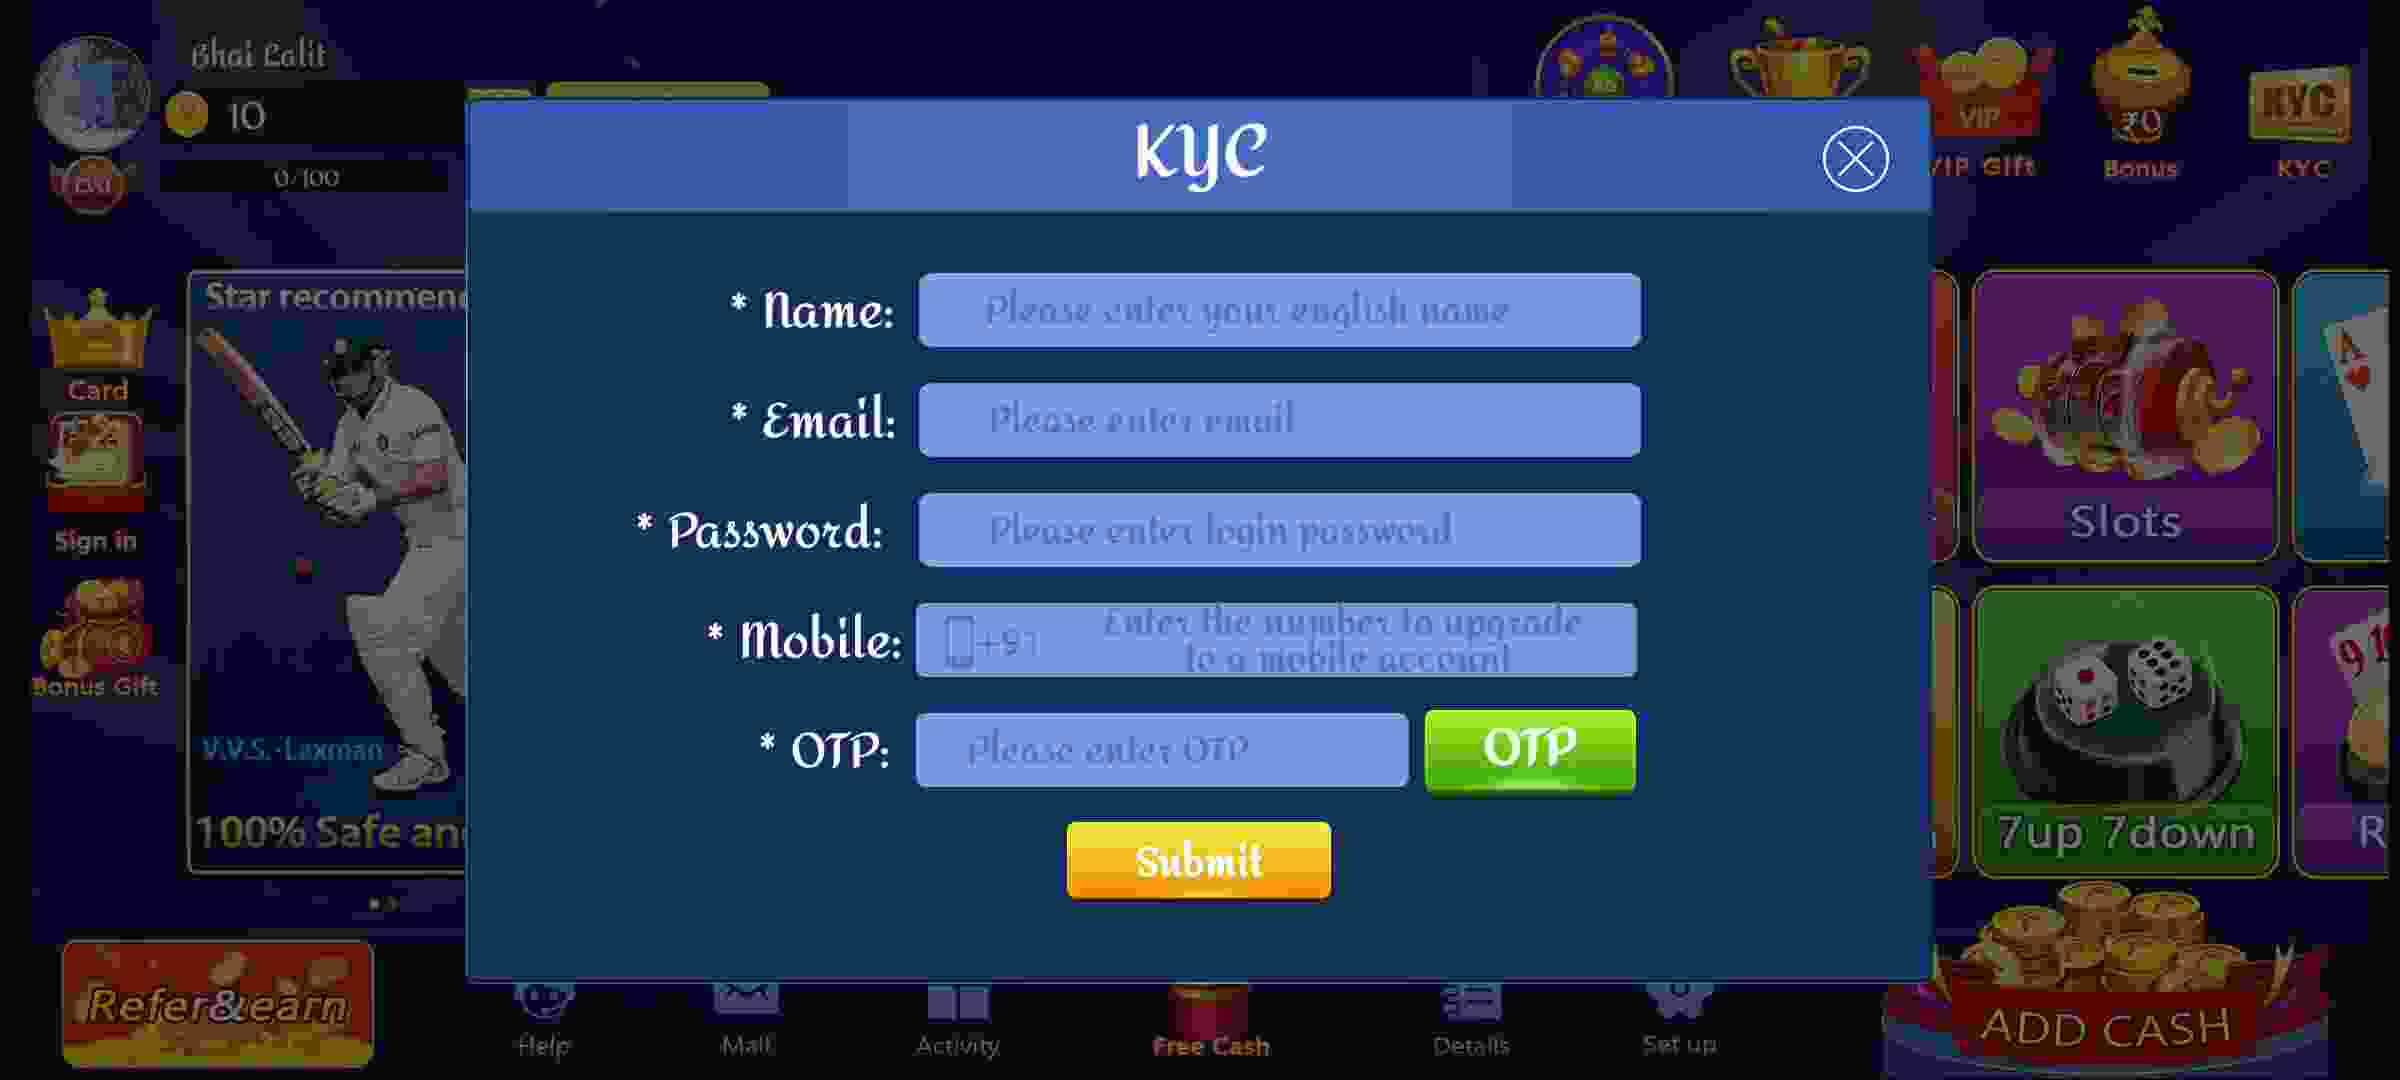 How To Easily Withdraw Your Money From Teen Patti Friend Apk